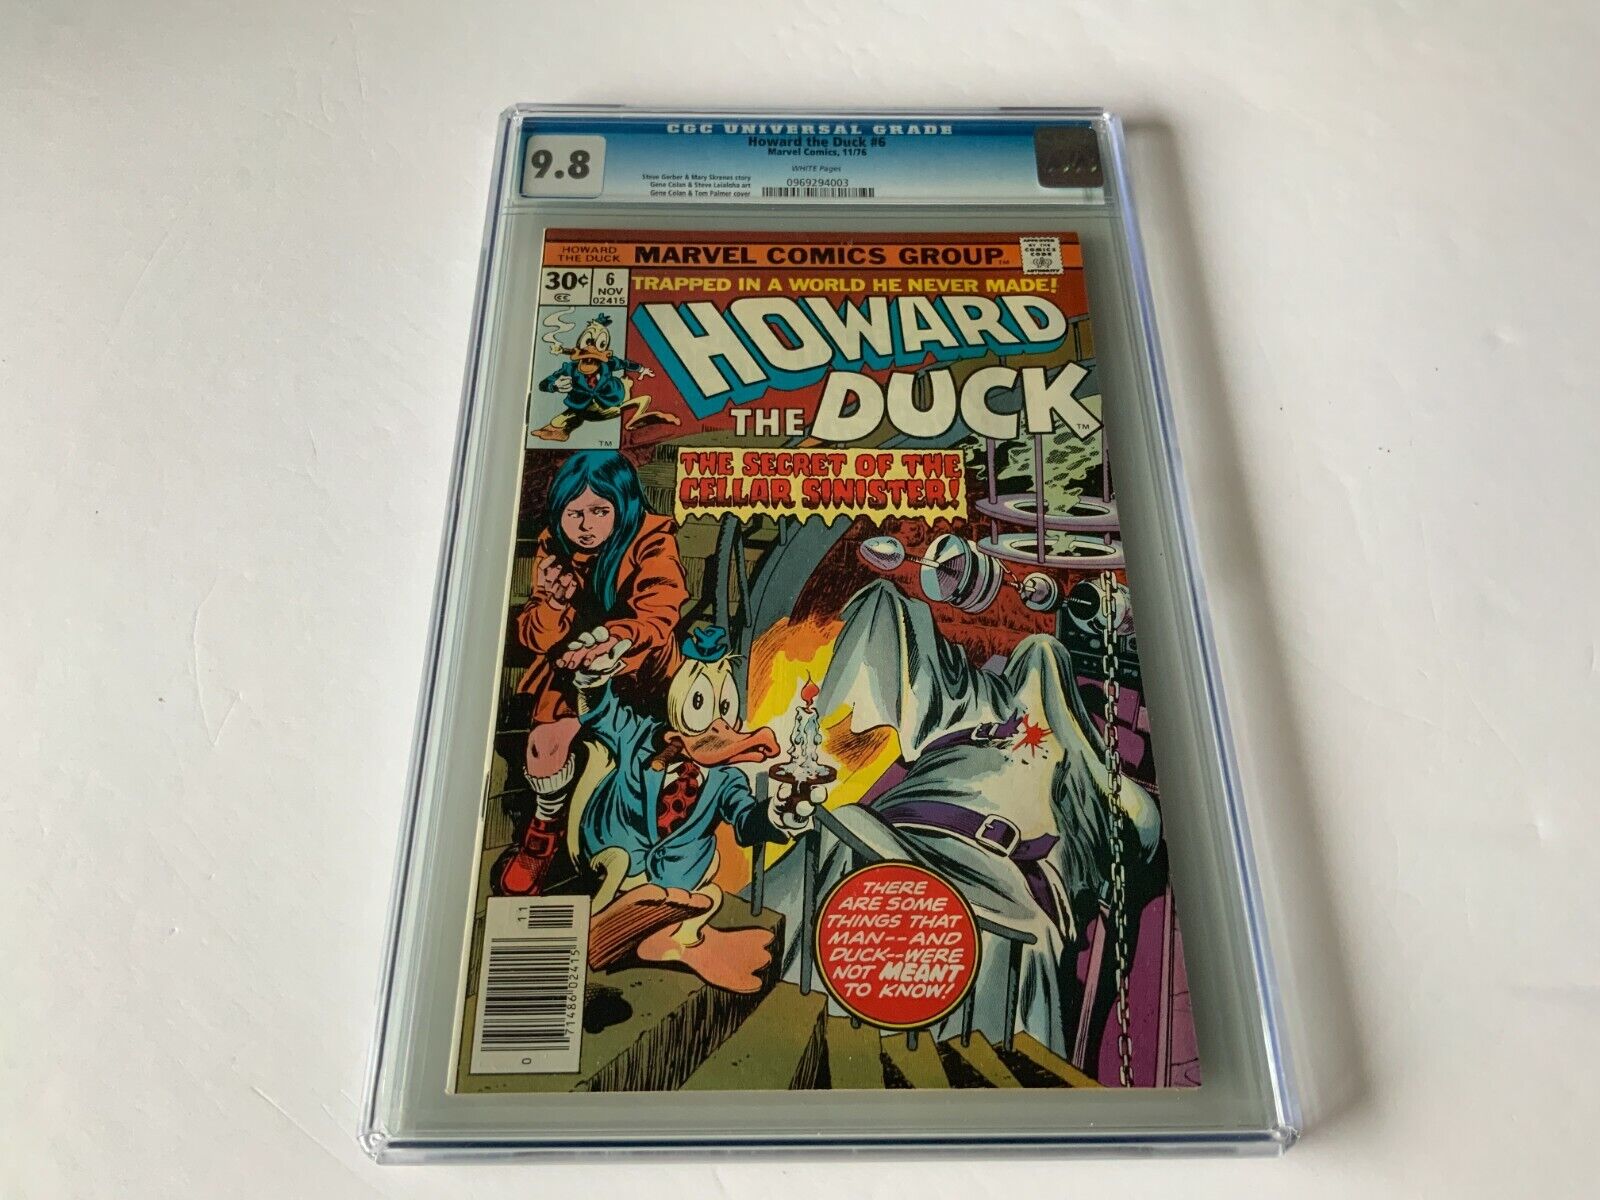 HOWARD THE DUCK 6 CGC 9.8 WHITE PAGES CELLAR SINISTER MARVEL COMICS 1976